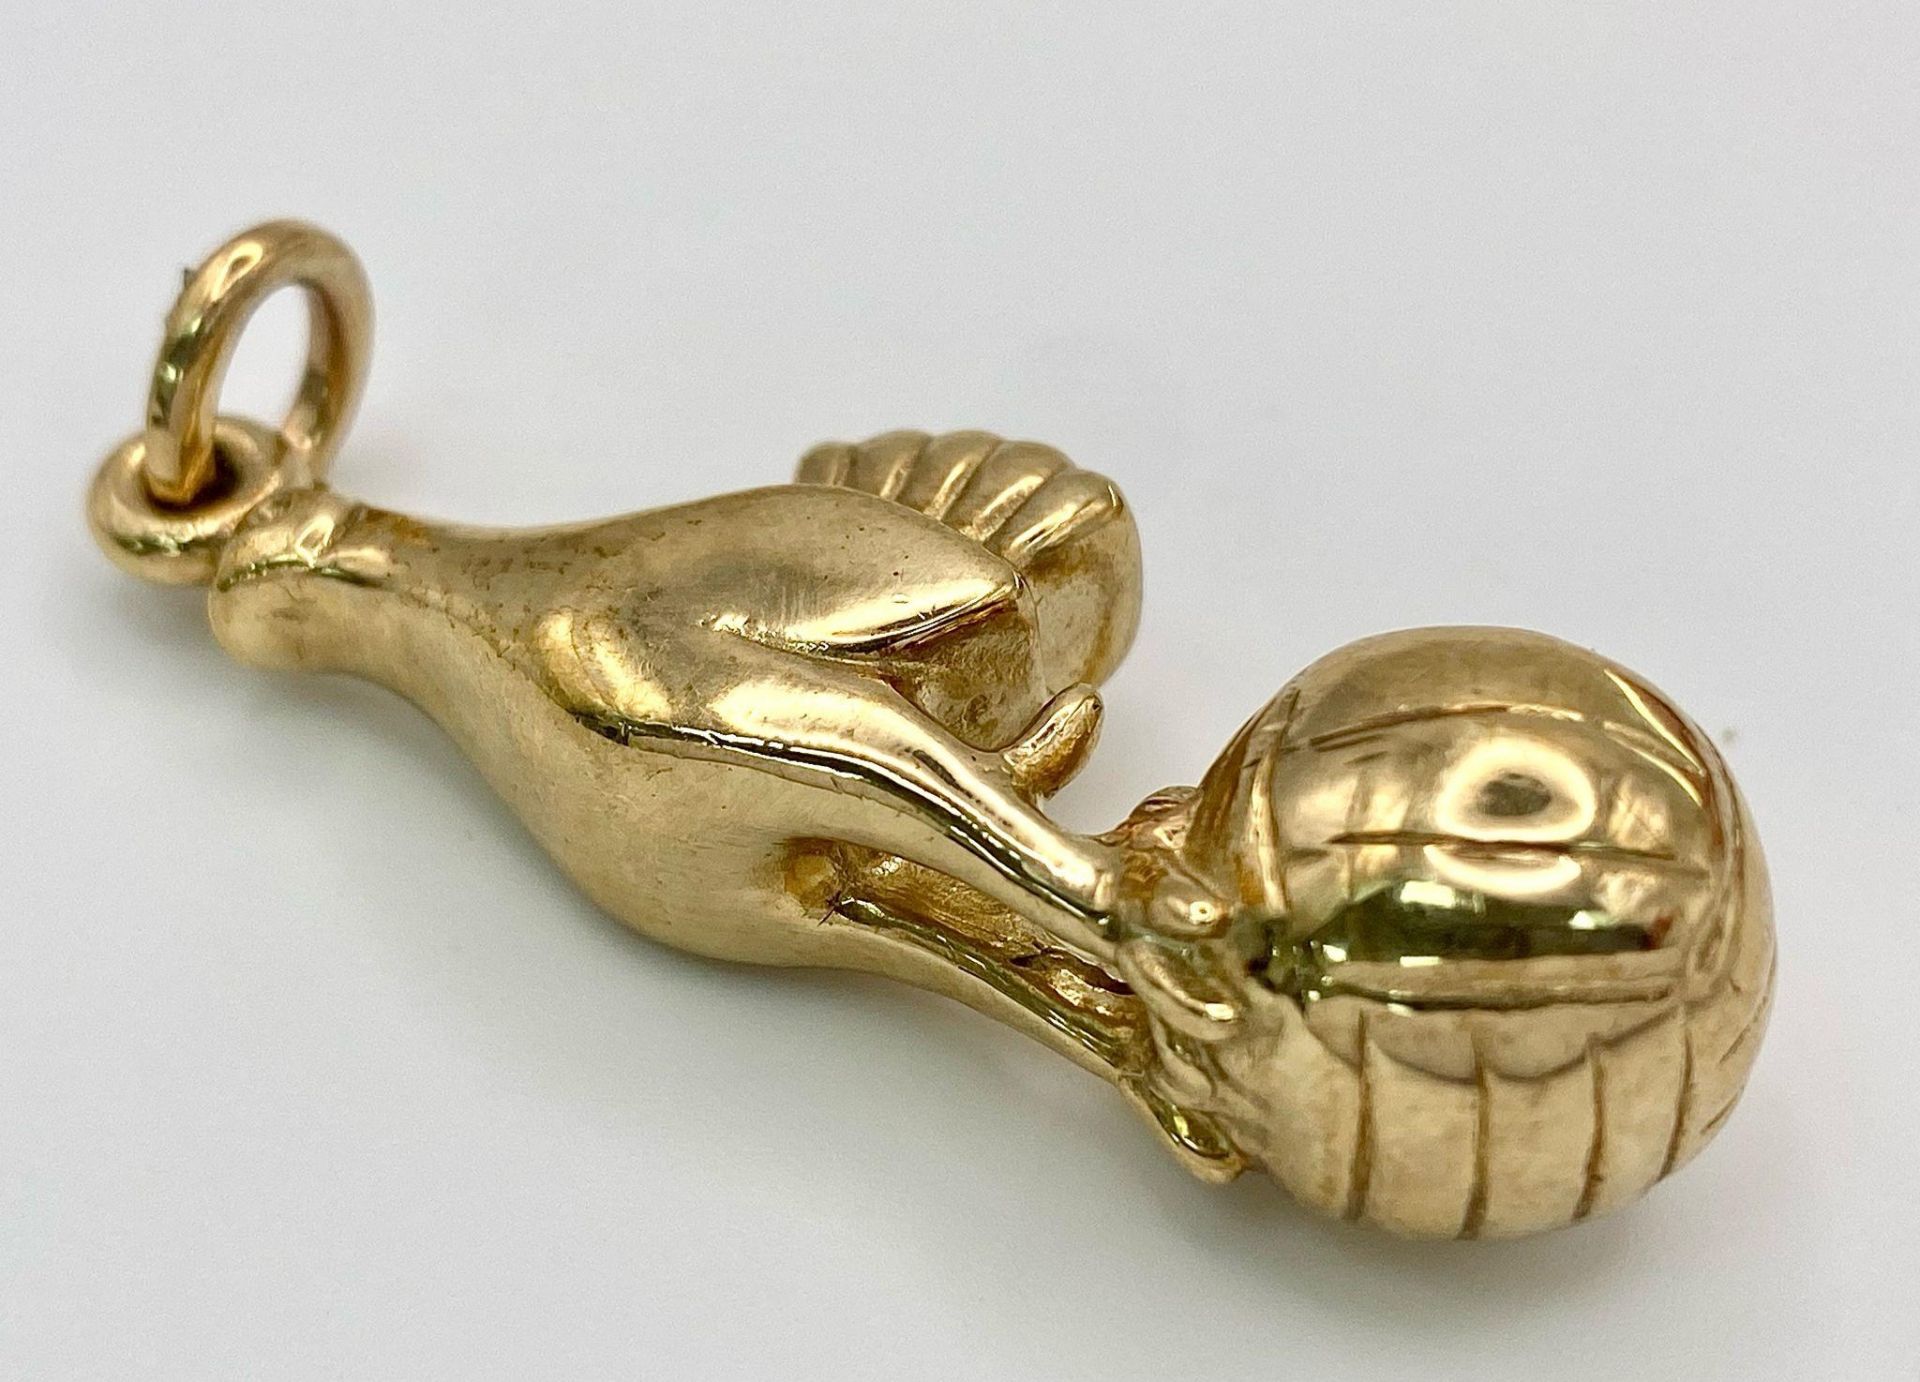 A 9K YELLOW GOLD SOLID HEAVY TOTTENHAM HOTSPURS COCKEREL PENDANT. TOTAL WEIGHT 36.1G - Image 3 of 5